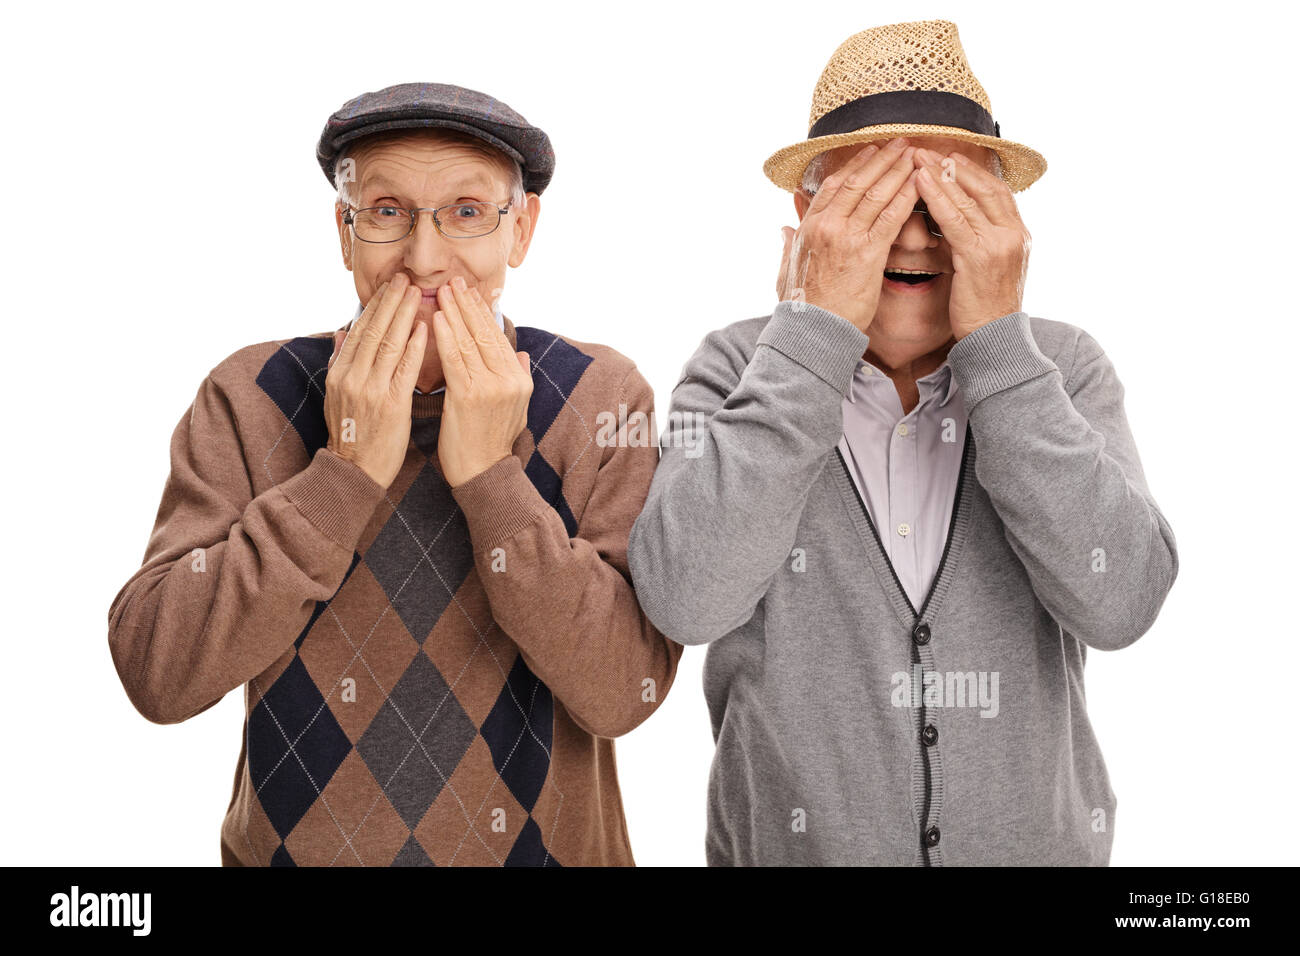 Two cheerful senior gentlemen covering their eyes and mouth isolated on white background Stock Photo